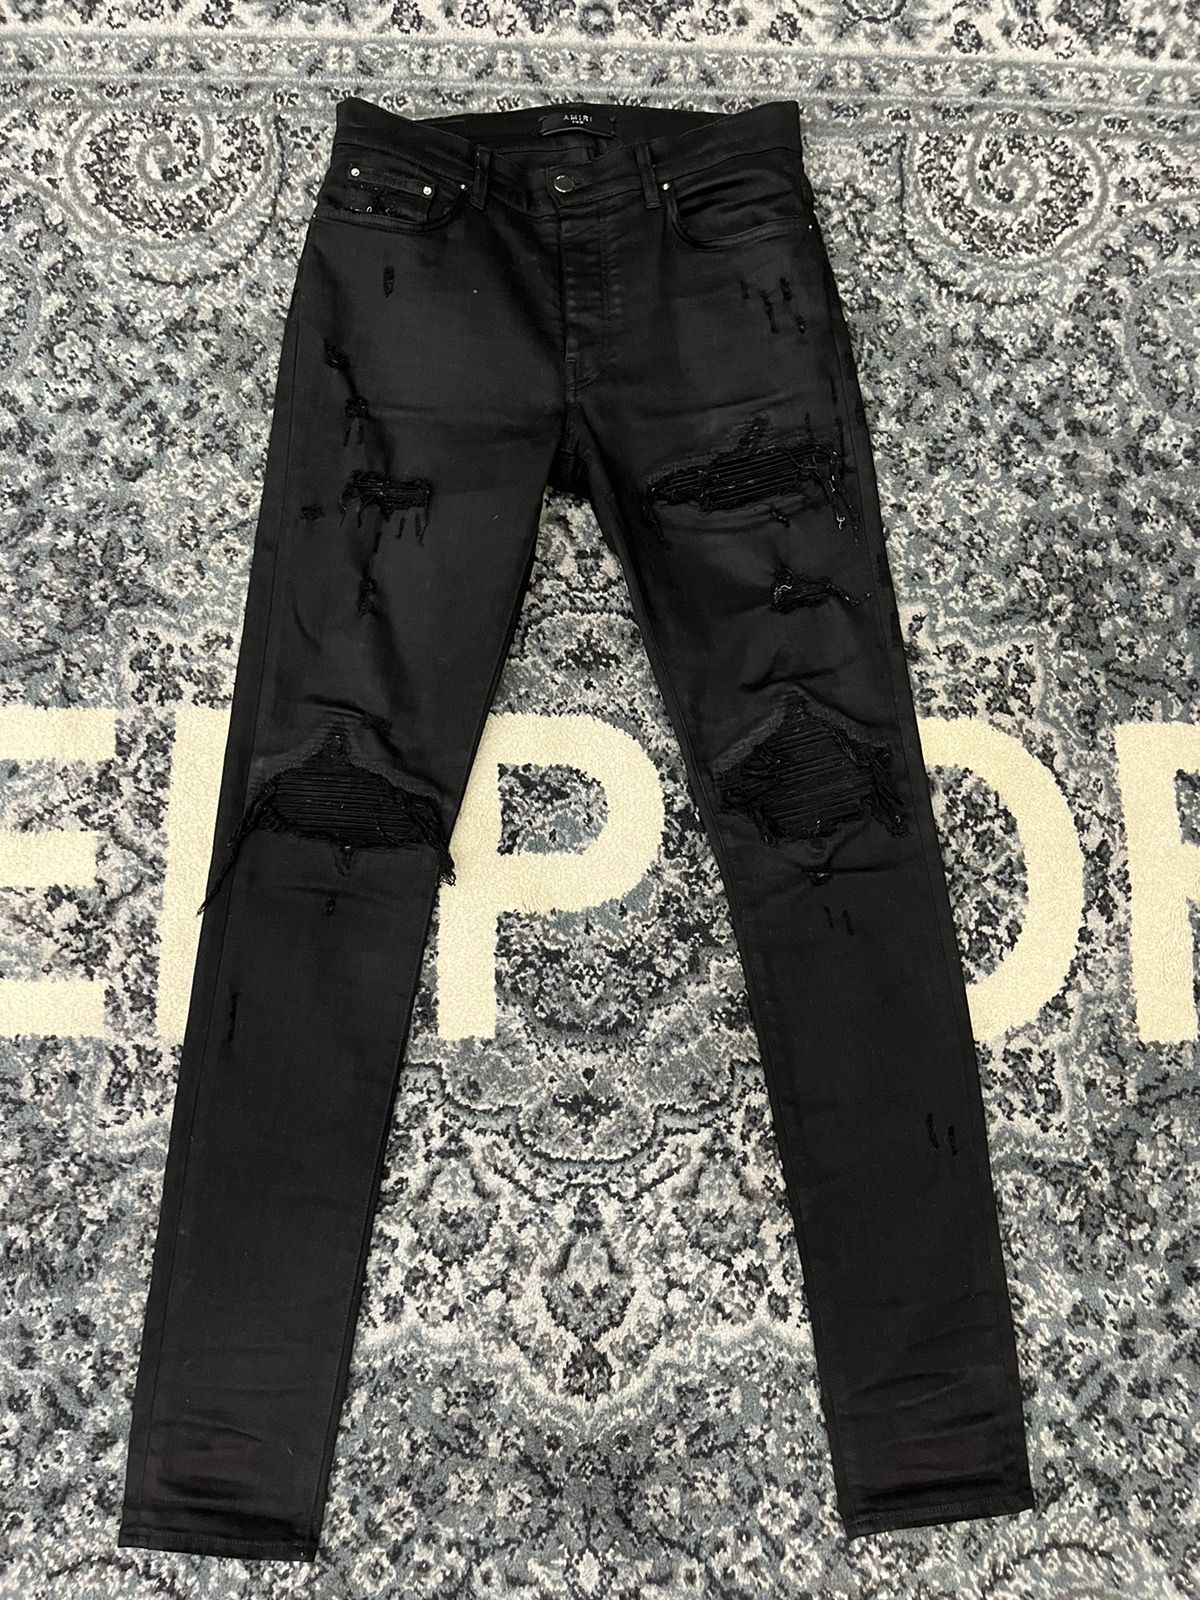 Pre-owned Amiri Mx1 Jeans Black Patches Size 32 